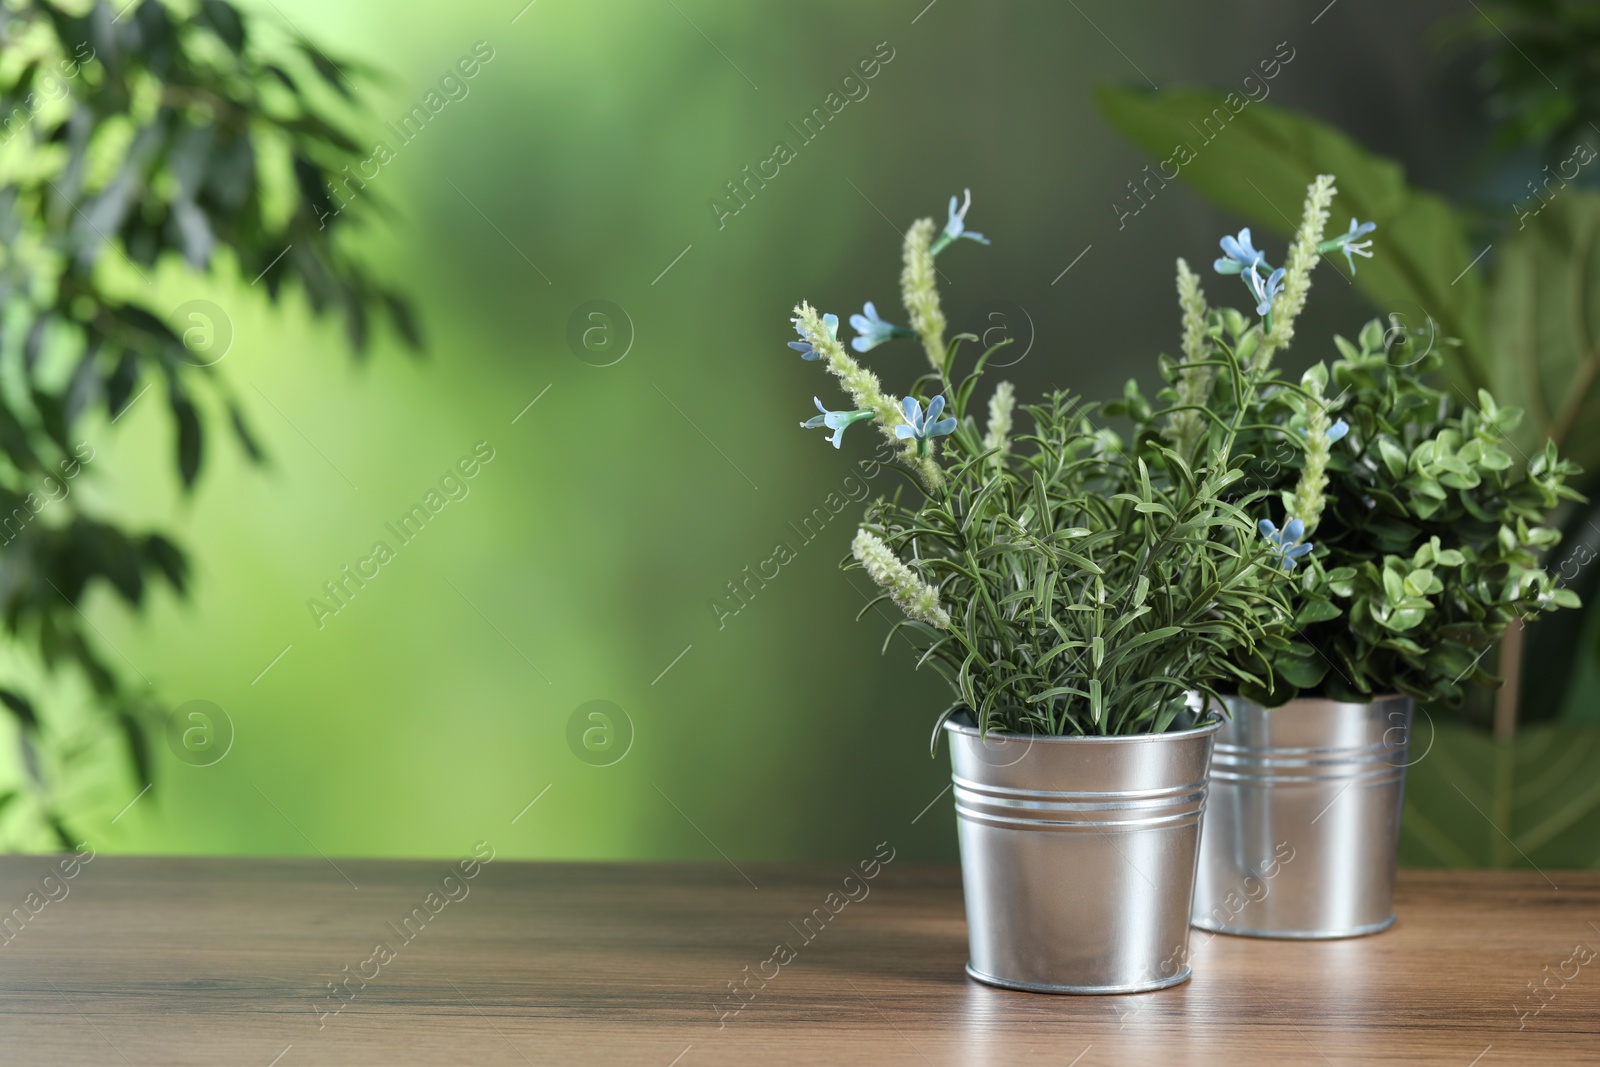 Photo of Fresh blooming blue lavender flowers and oregano growing in pots on wooden table outdoors, space for text